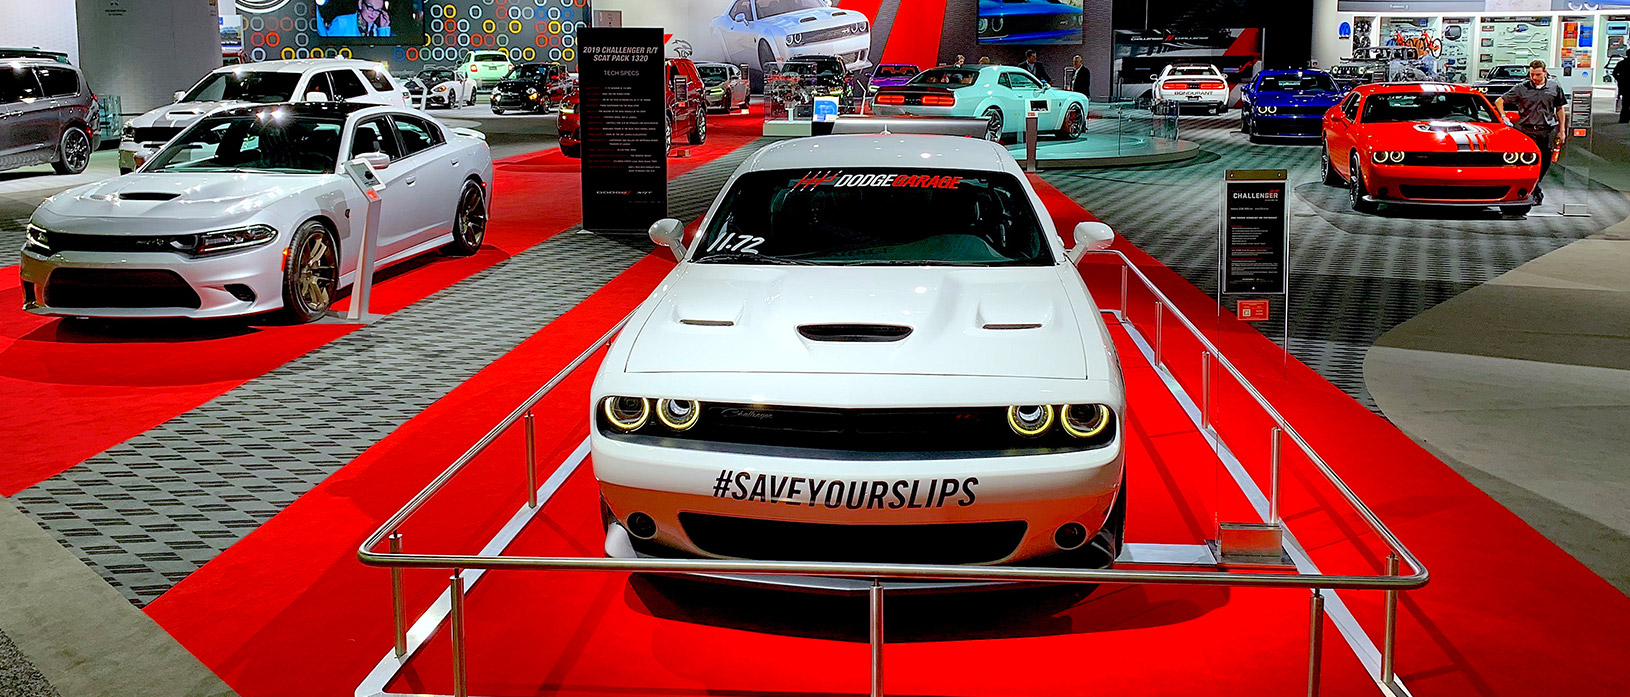 Dodge display at the 2019 North American International Auto Show